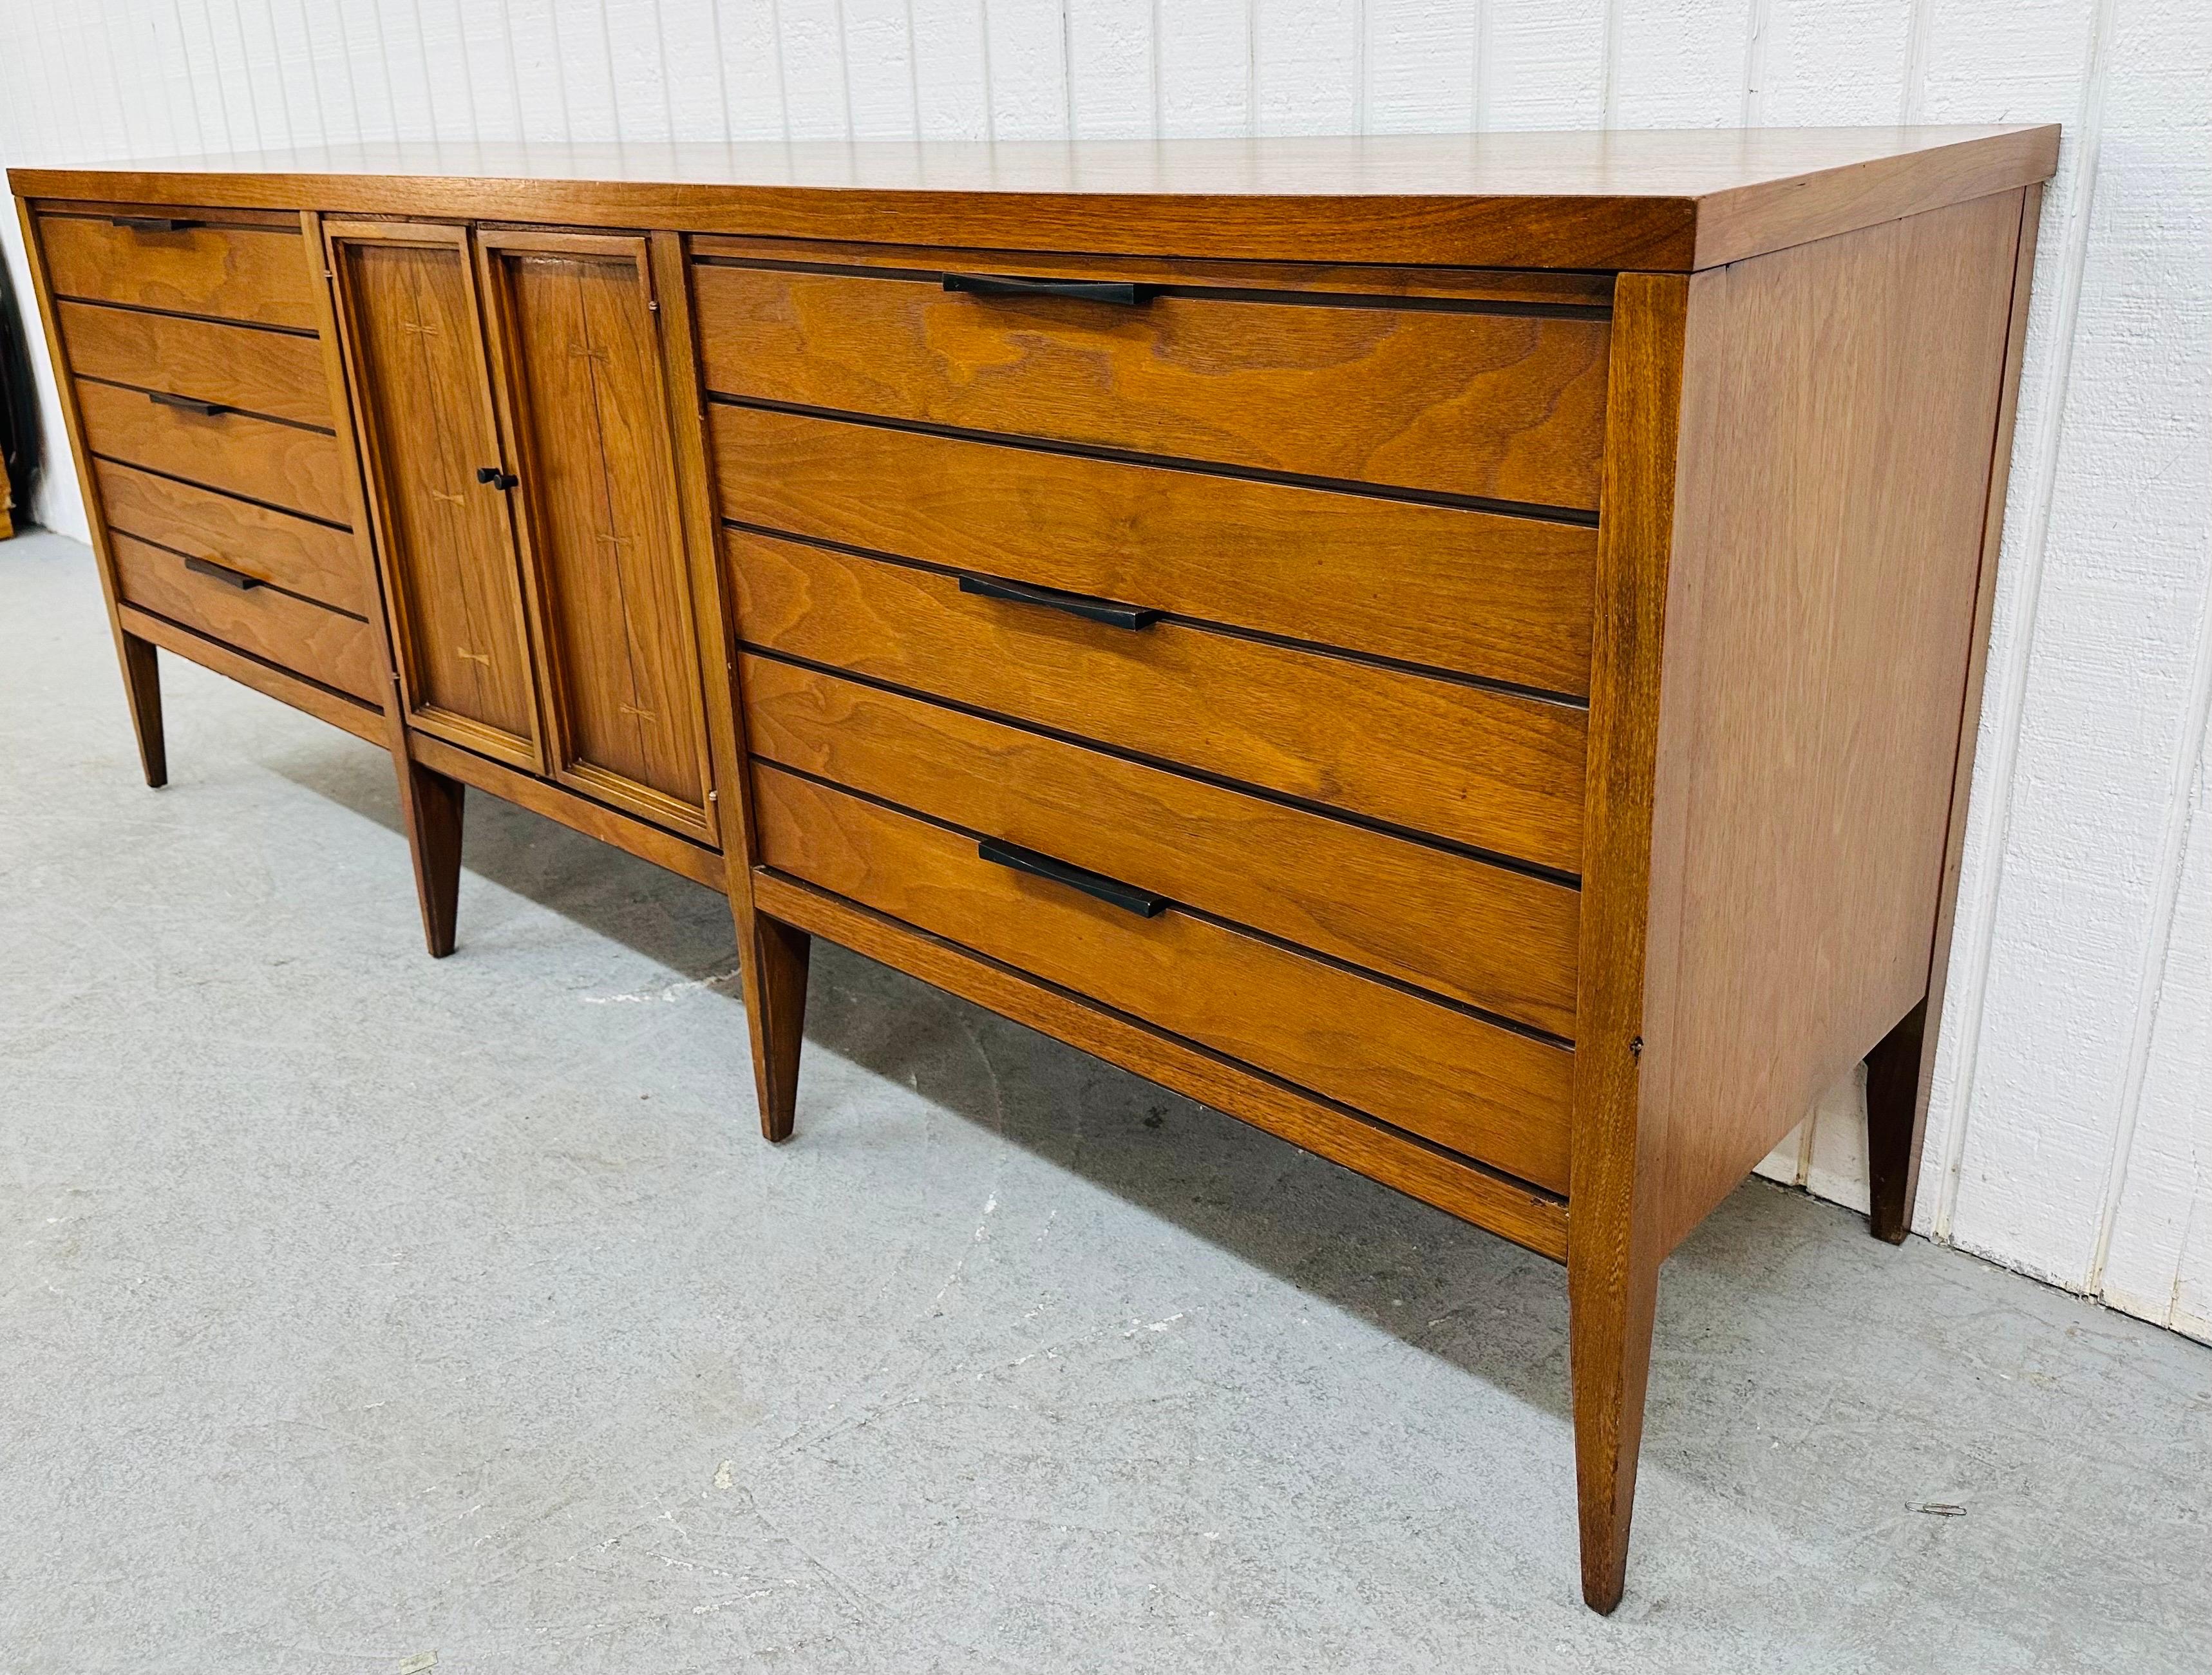 This listing is for a Mid-Century Modern Lane “Tuxedo” Walnut Triple Dresser. Featuring a straight line design, three large drawers on the left, two doors that open up to three hidden drawers, and three large drawers on the right, original black